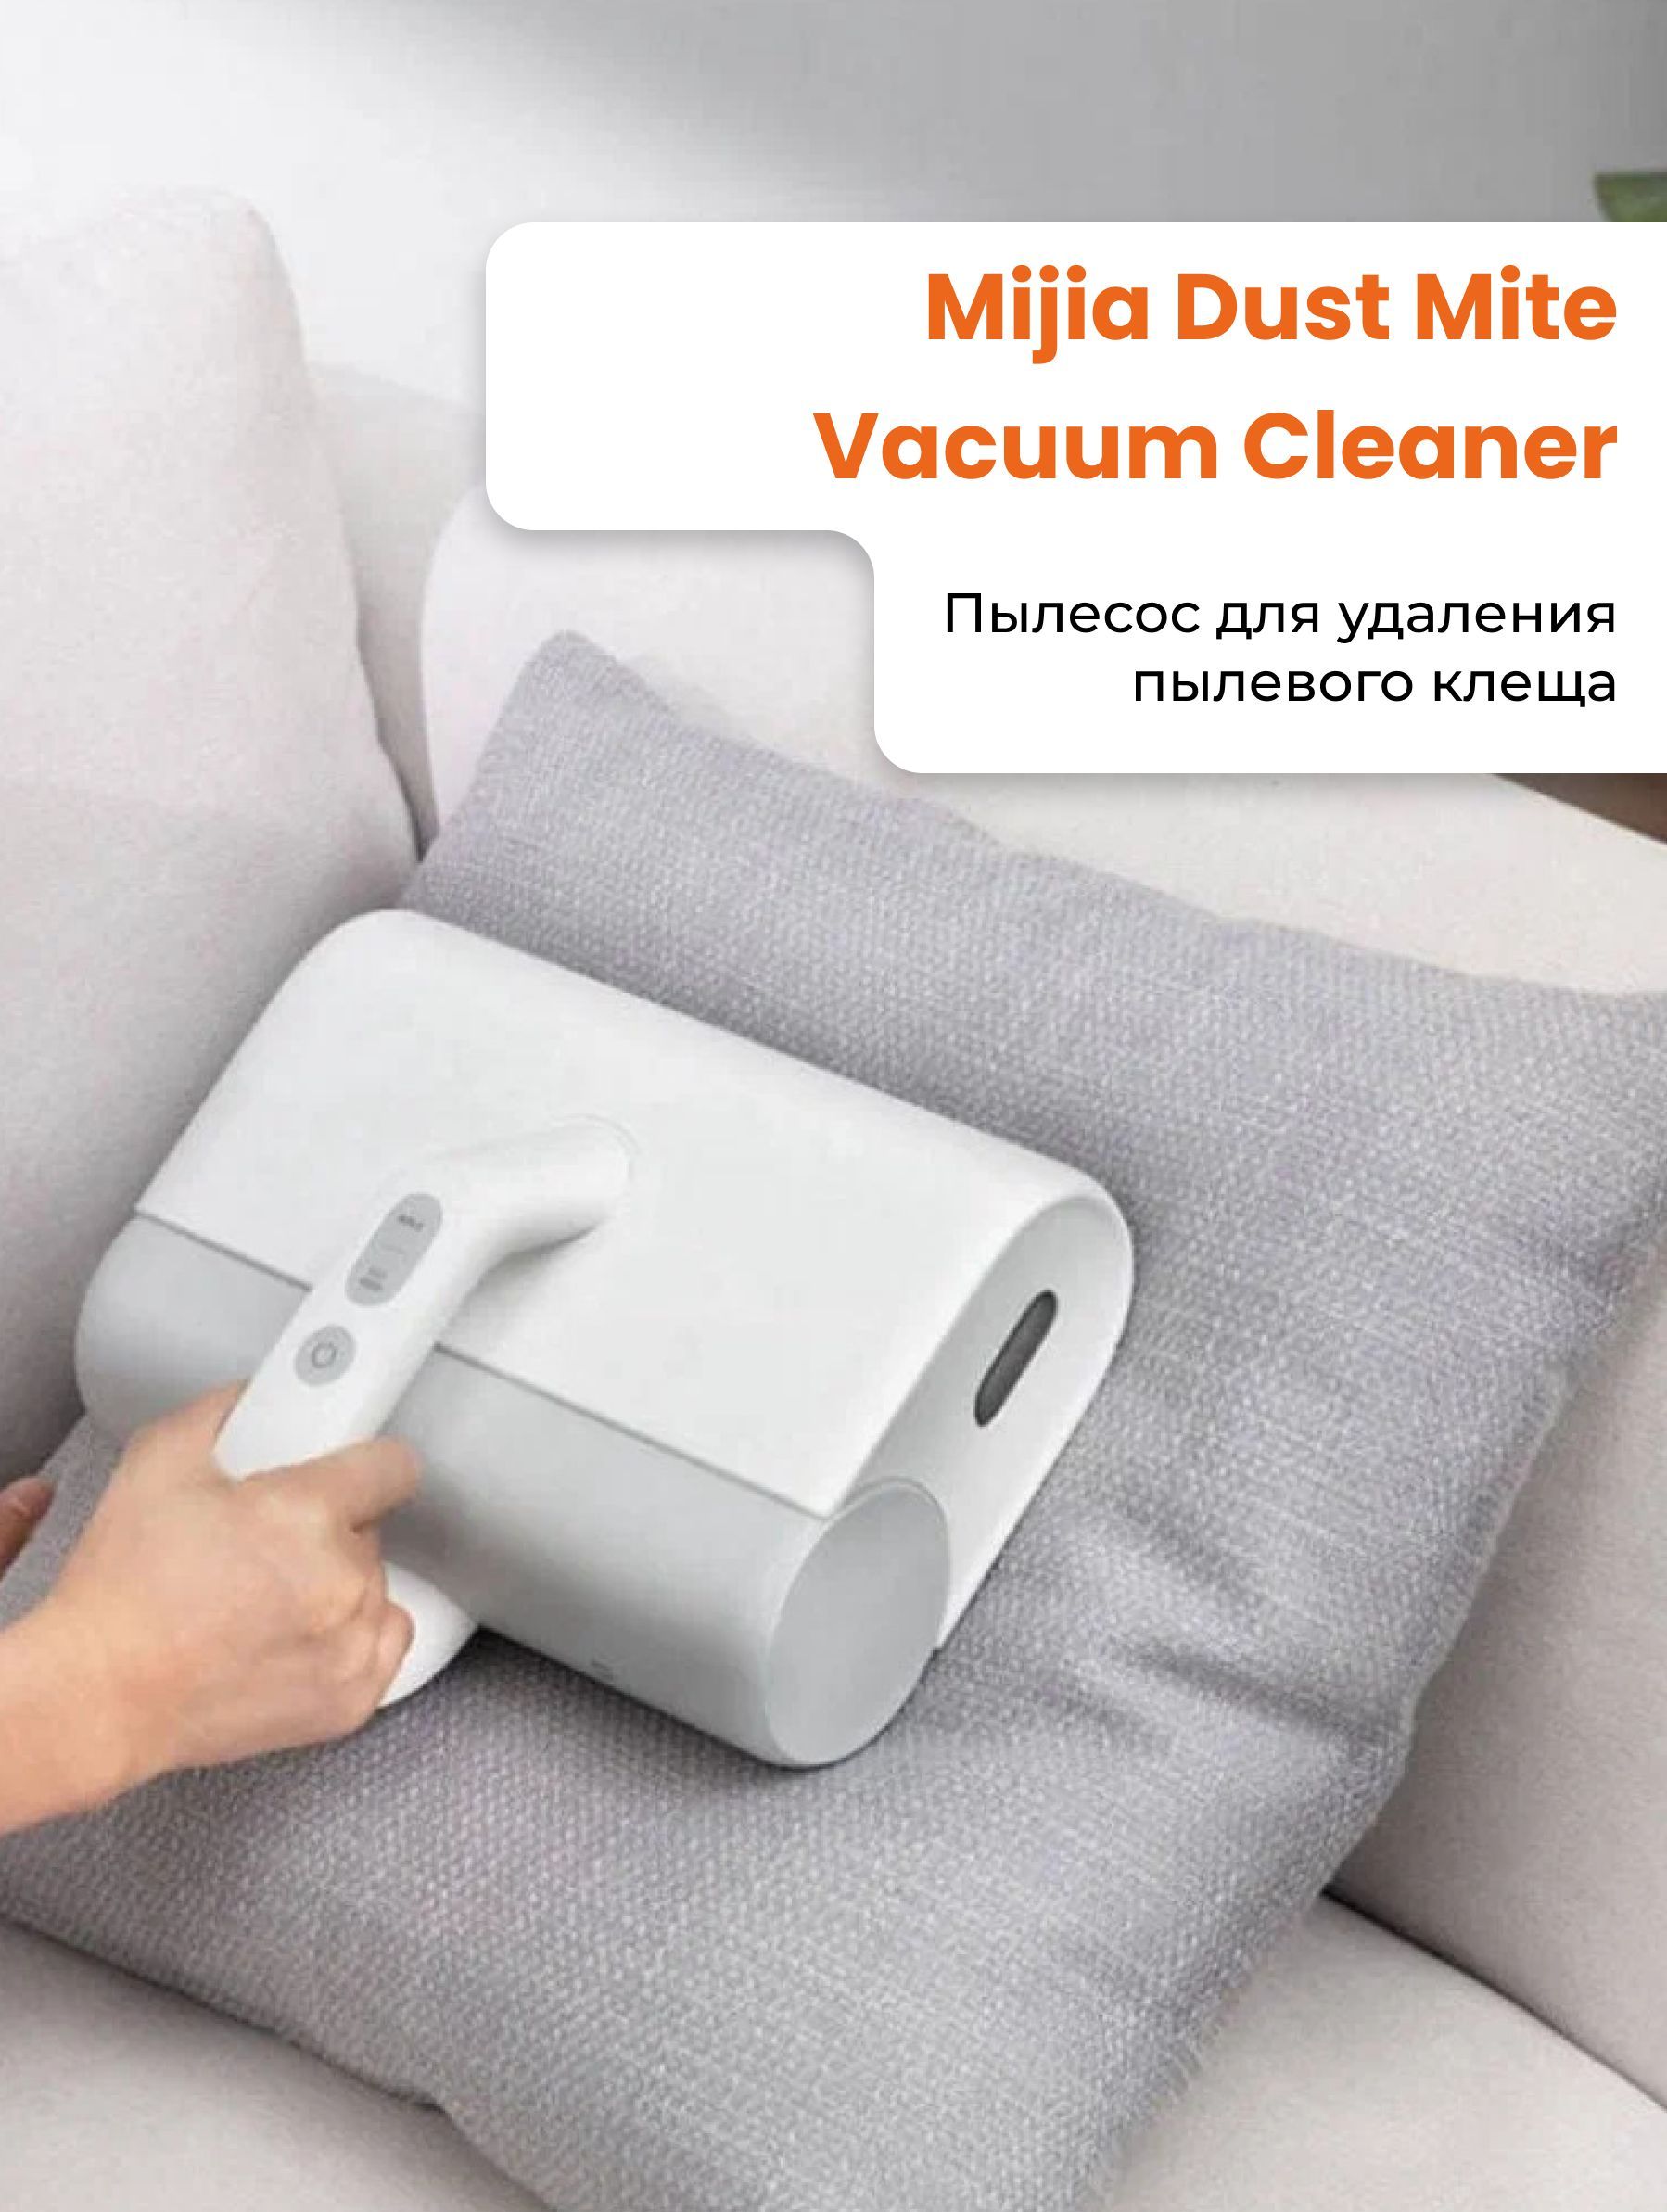 Mjcmy01dy dust mite vacuum cleaner. Xiaomi mjcmy01dy. Пылесос Xiaomi (mjcmy01dy). Xiaomi Dust Mite Vacuum. Xiaomi Mijia Dust Mite Vacuum Cleaner.